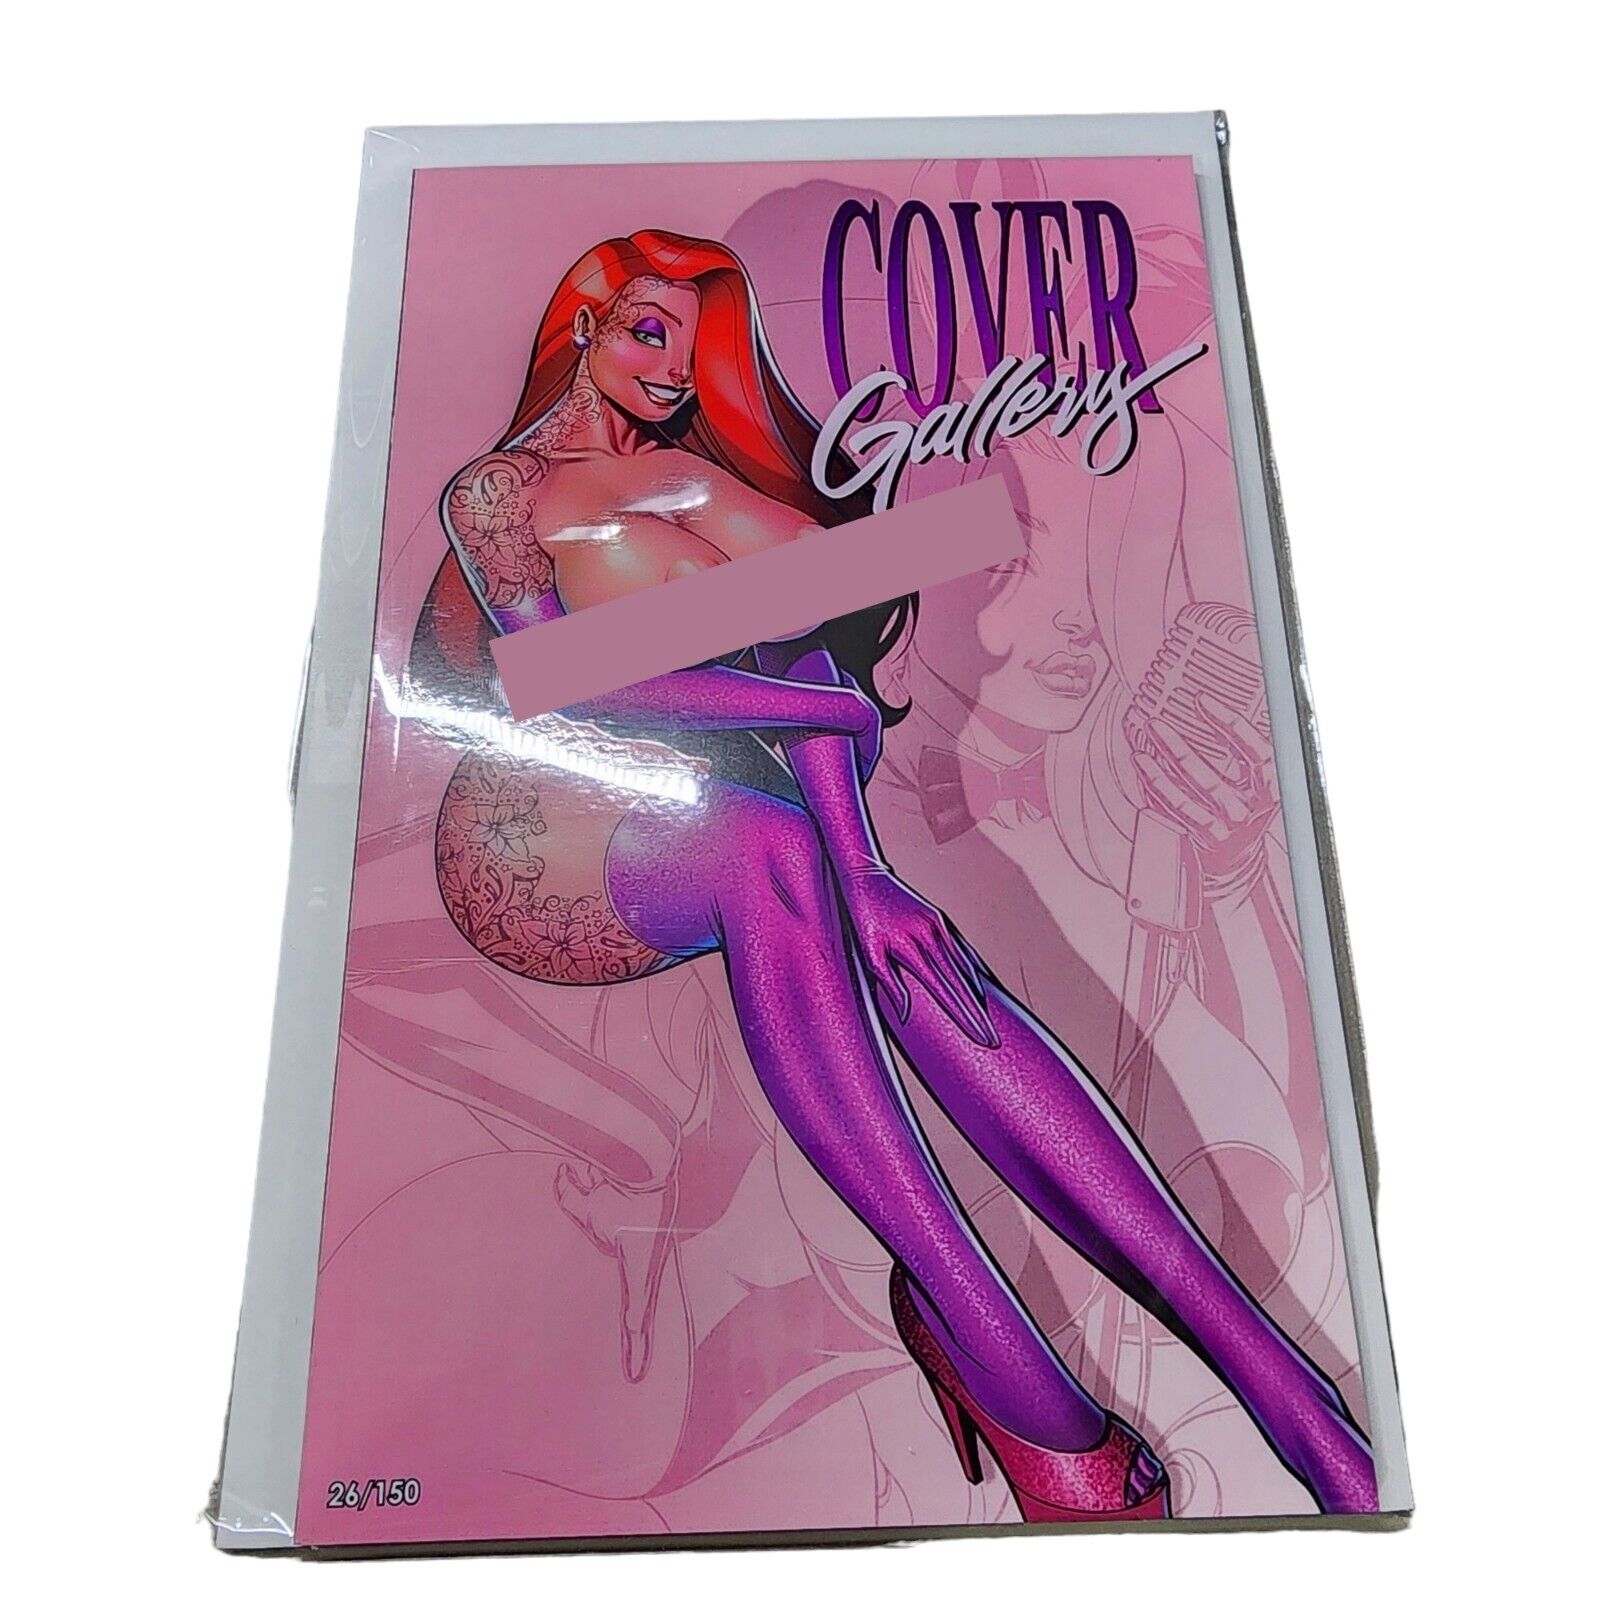 JOSE VARESE COVER GALLERY JESSICA RABBIT DD COVER SOLD OUT LTD 150 NM FAST SHIP